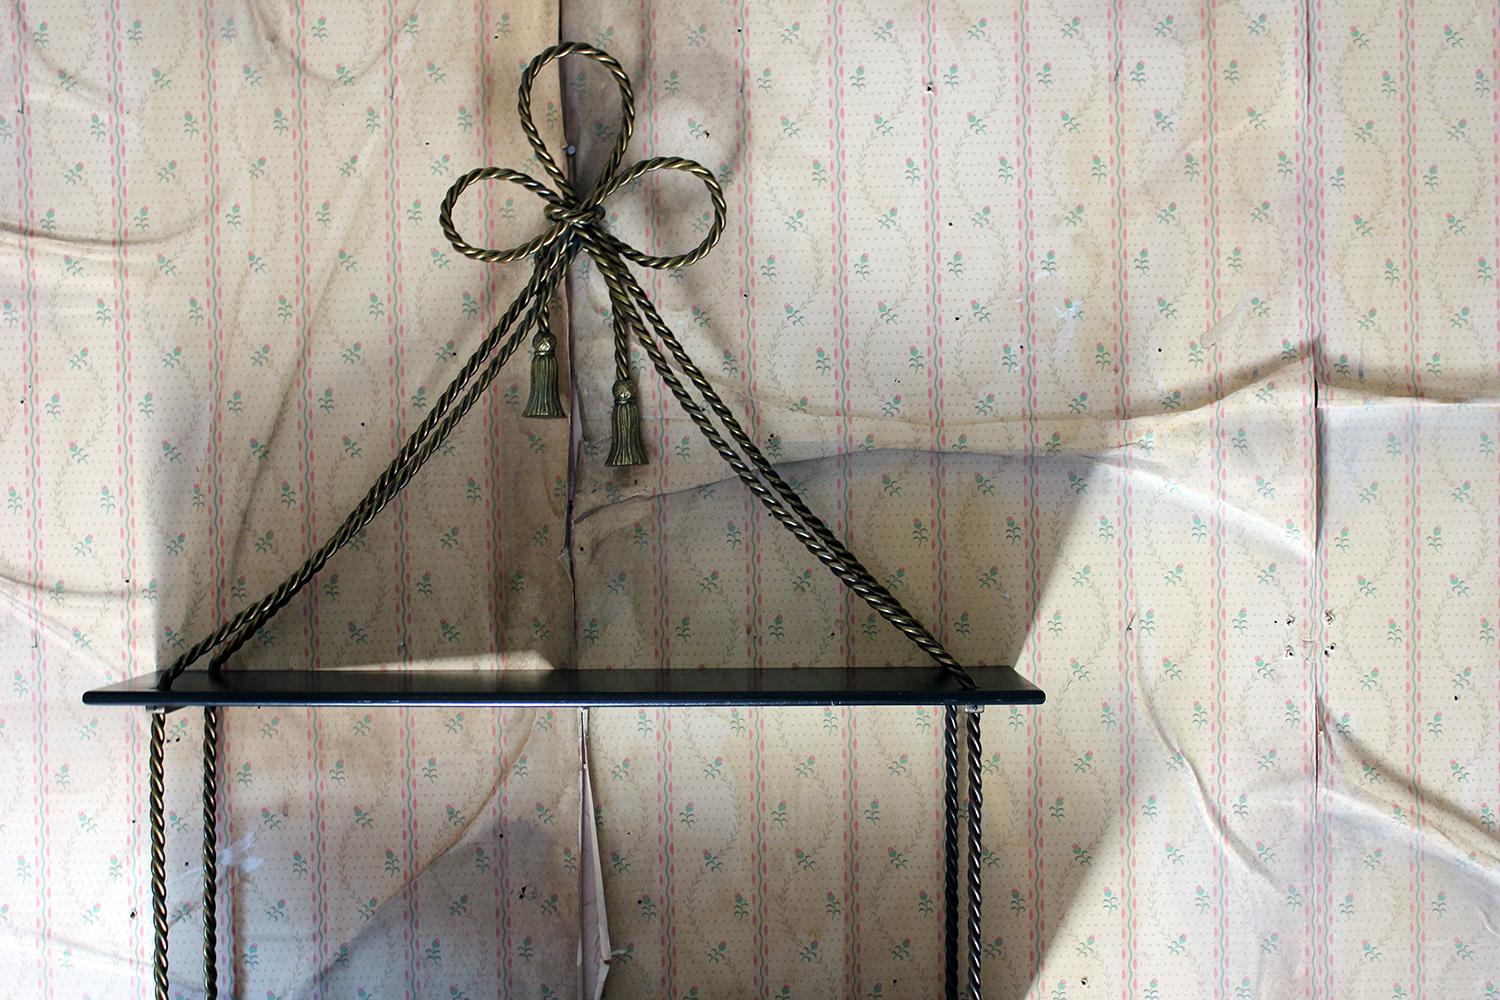 The ebonized and gilt-metal wall shelf having three tiers united by tasseled rope twist supports and terminating in a tied bow, the whole surviving from midcentury, England.

The shelving is in good stable and useable condition with no damages to